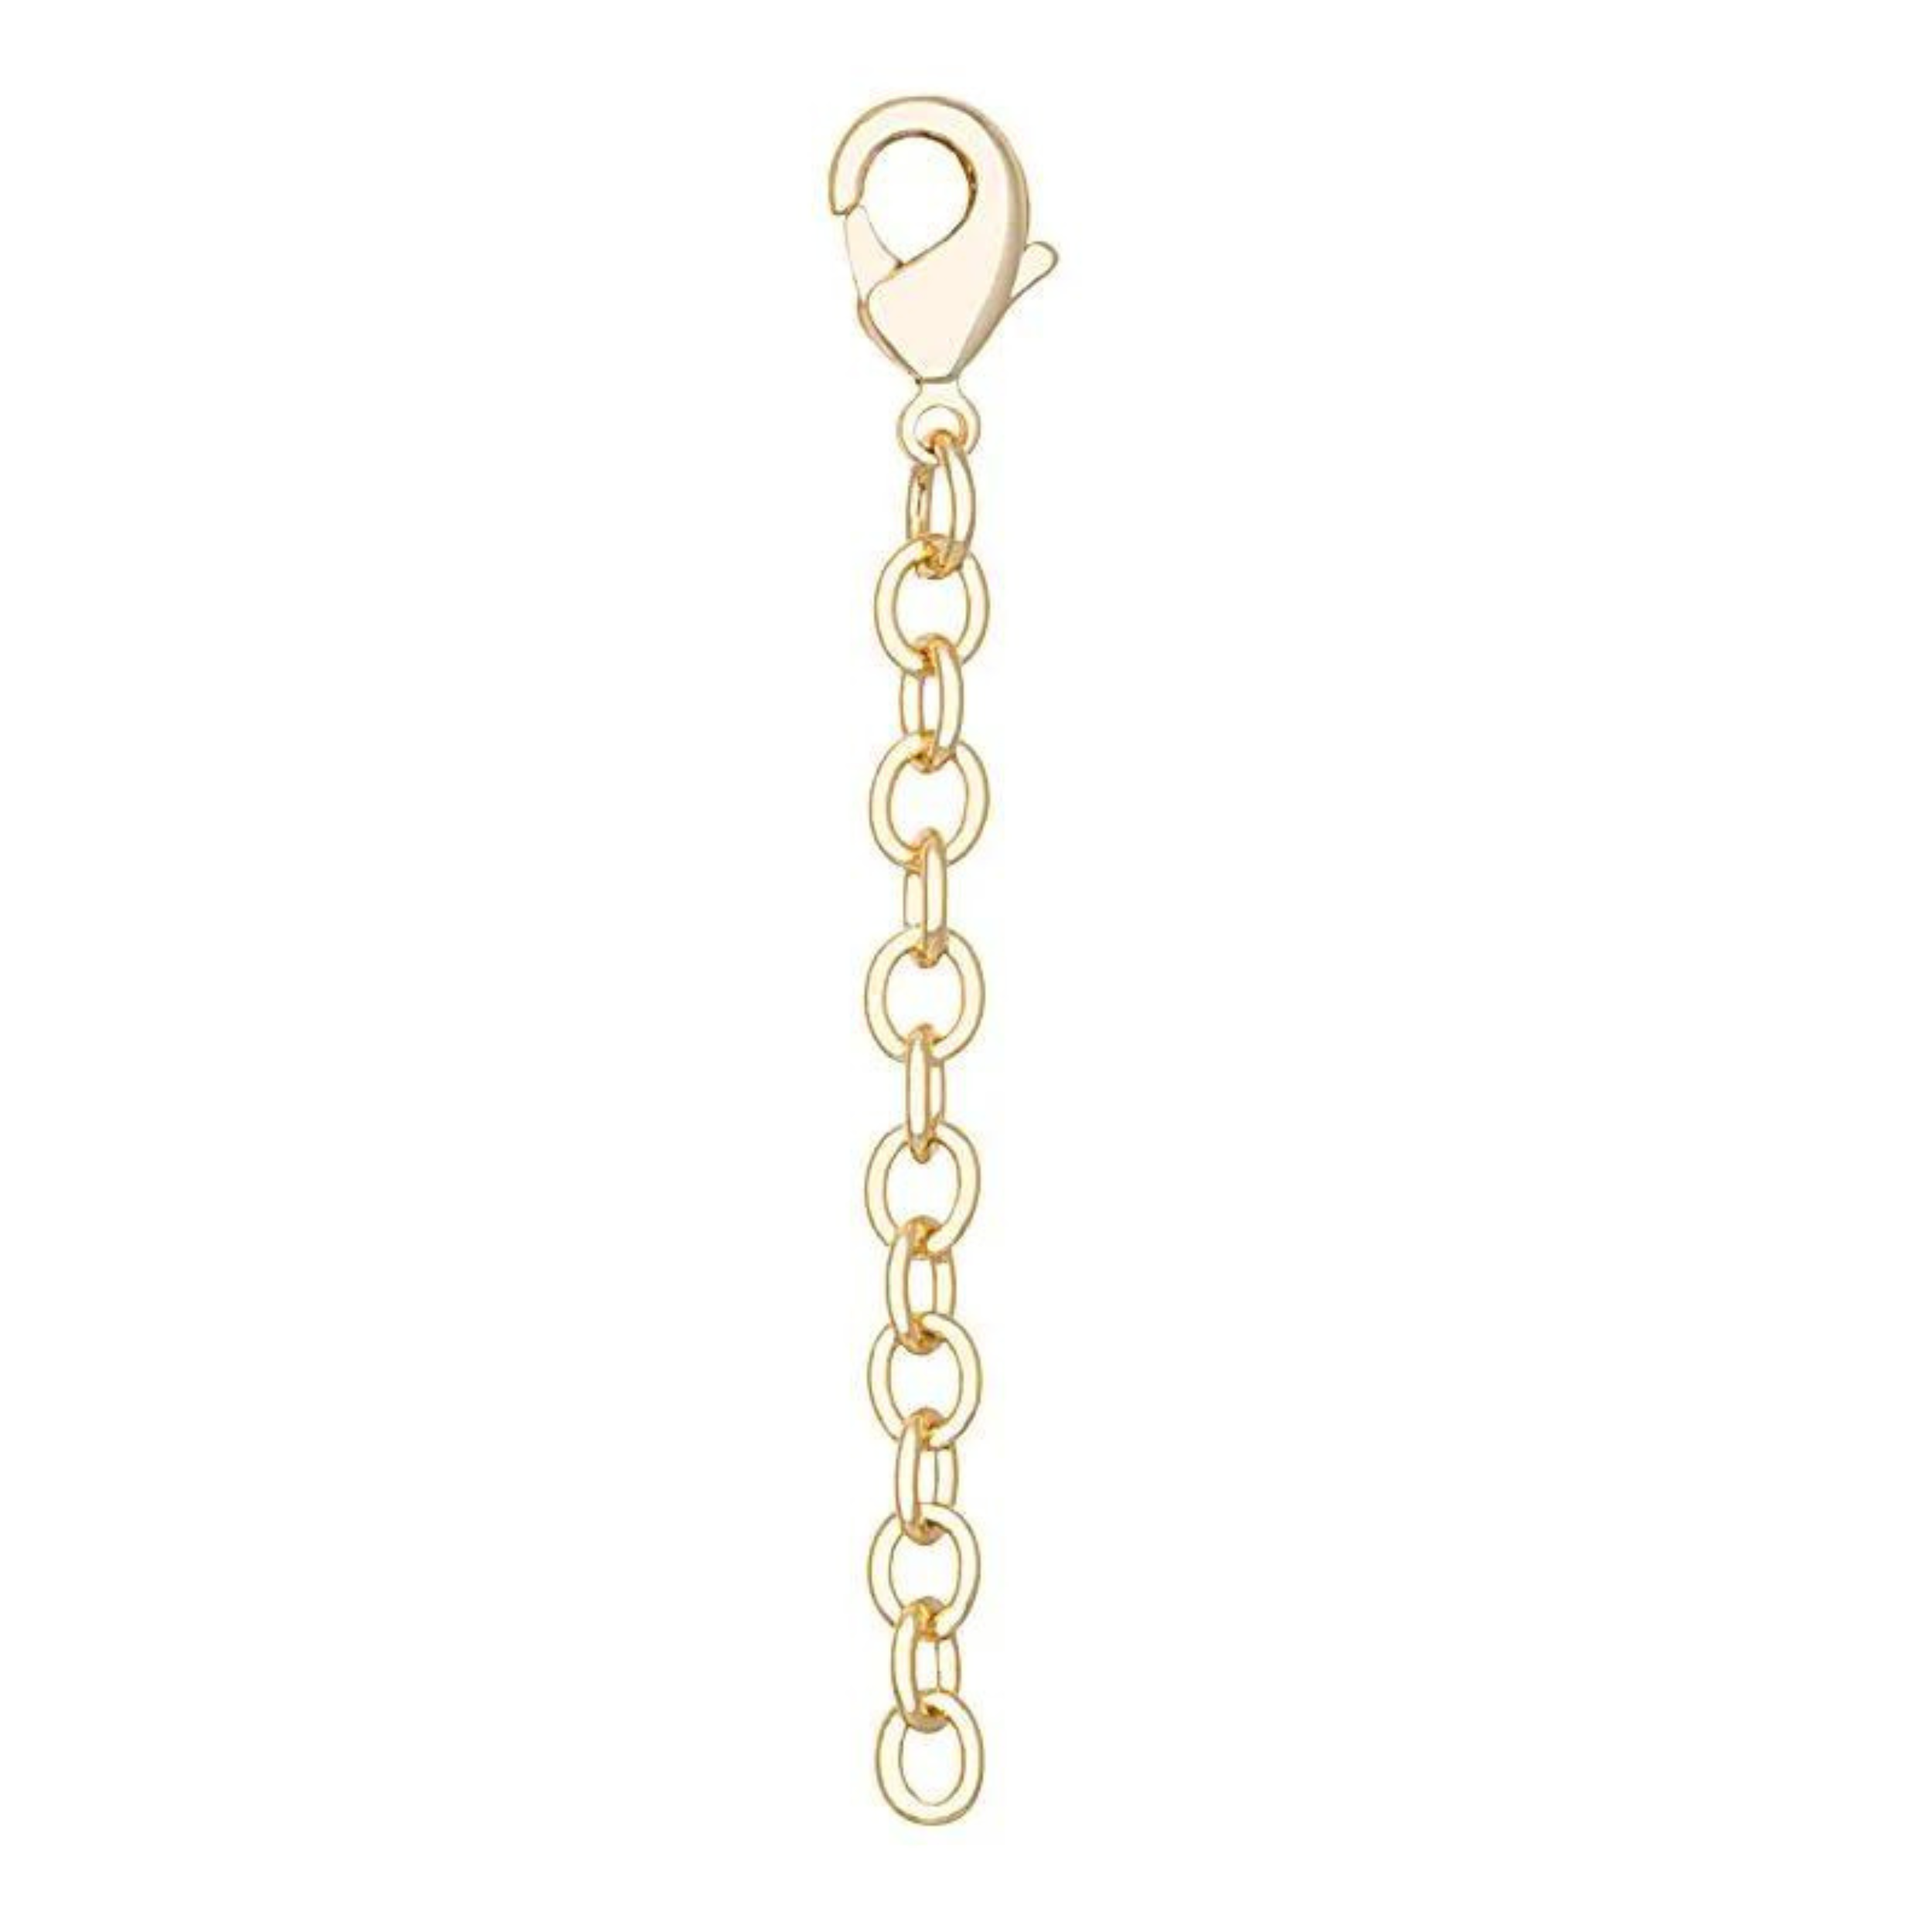 Gold two inch extender for a necklace with a lobster clasp, pictured on a white background.